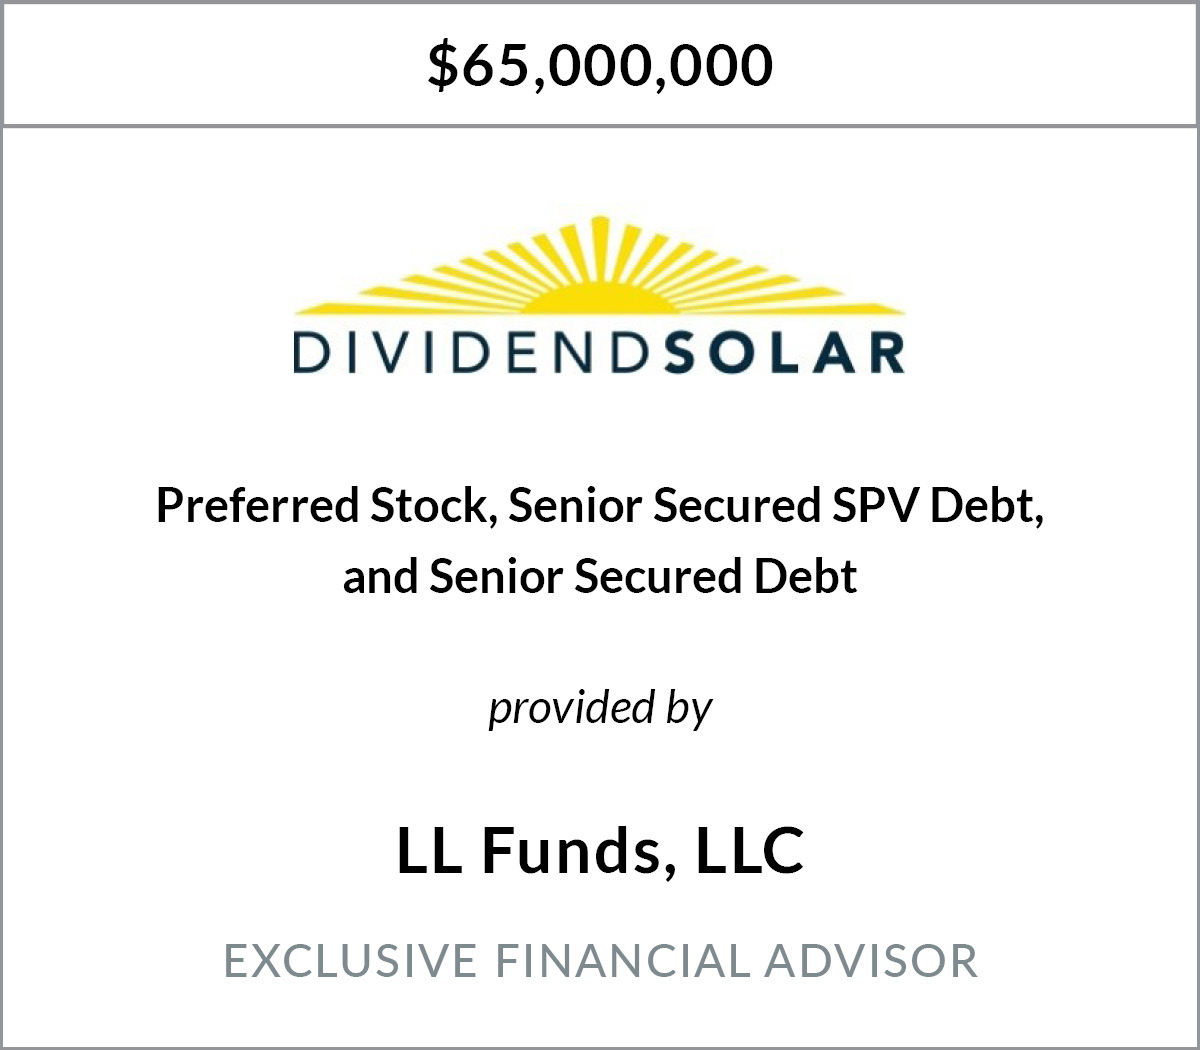 BPC Acts As Exclusive Financial Advisor to Dividend Solar in its Merger with Figtree Financing